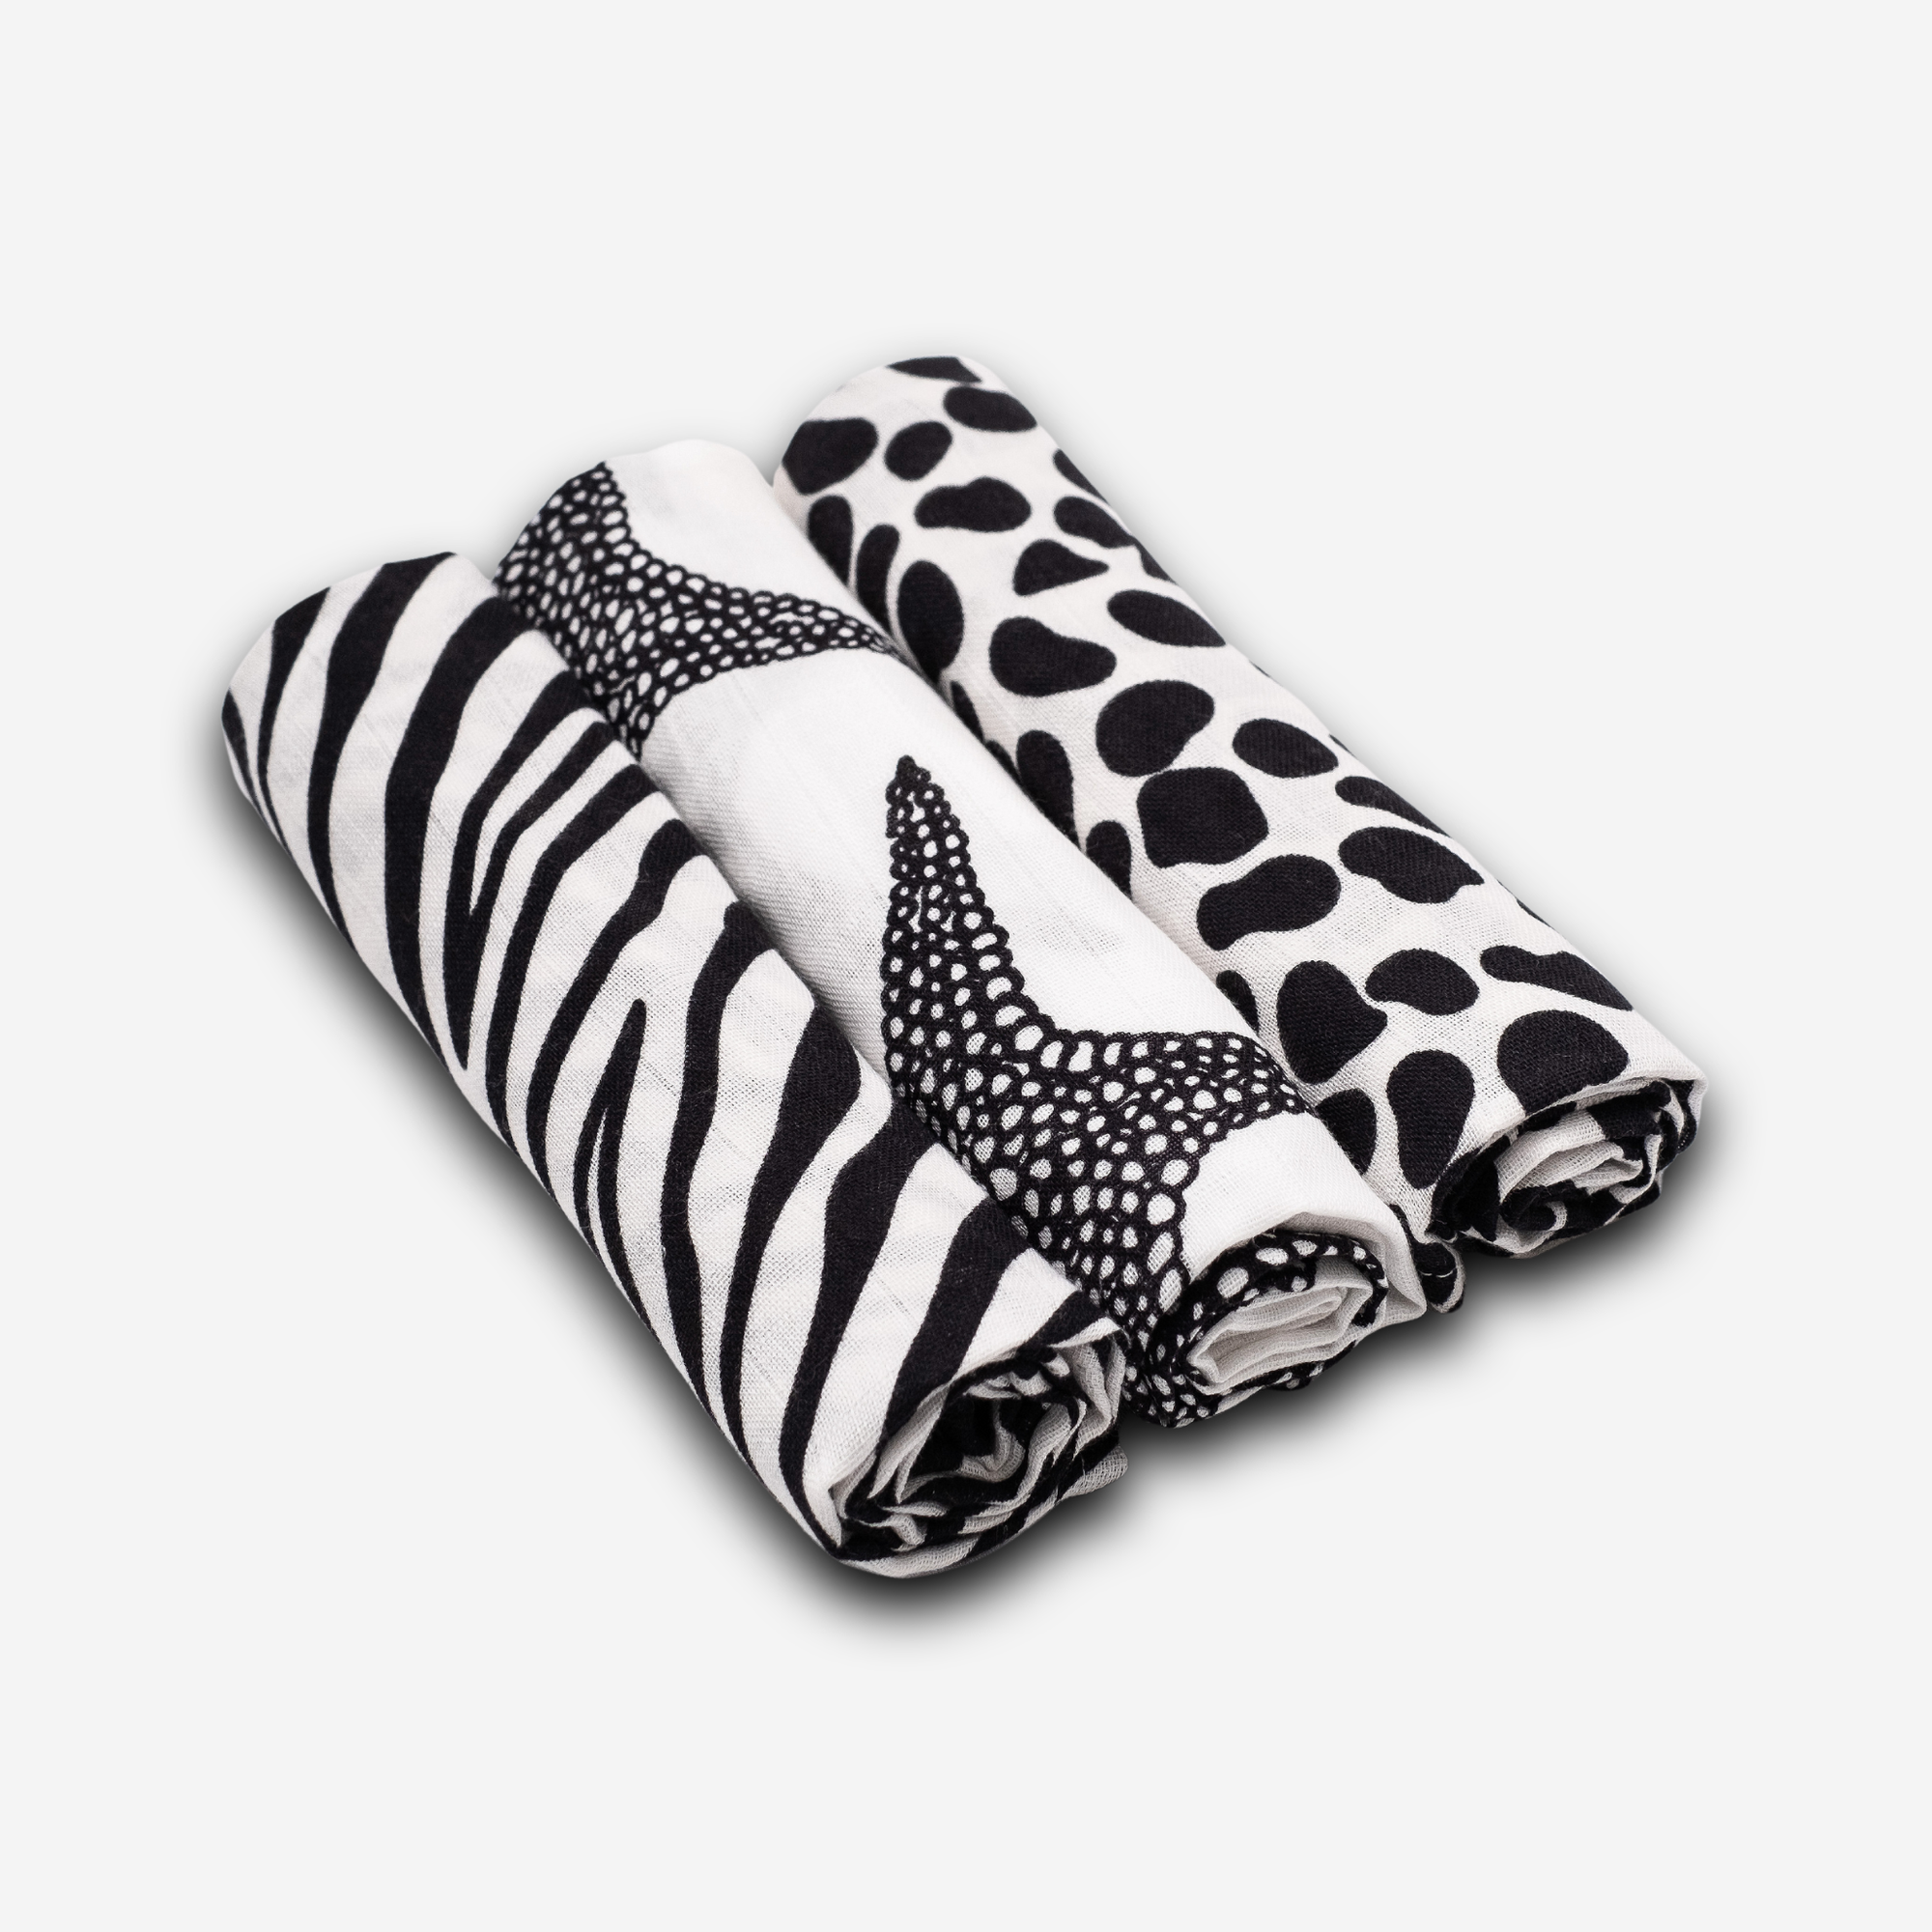 Etta Loves ANIMAL PRINT MUSLIN 3-PACK - for newborn to 4 month old babies